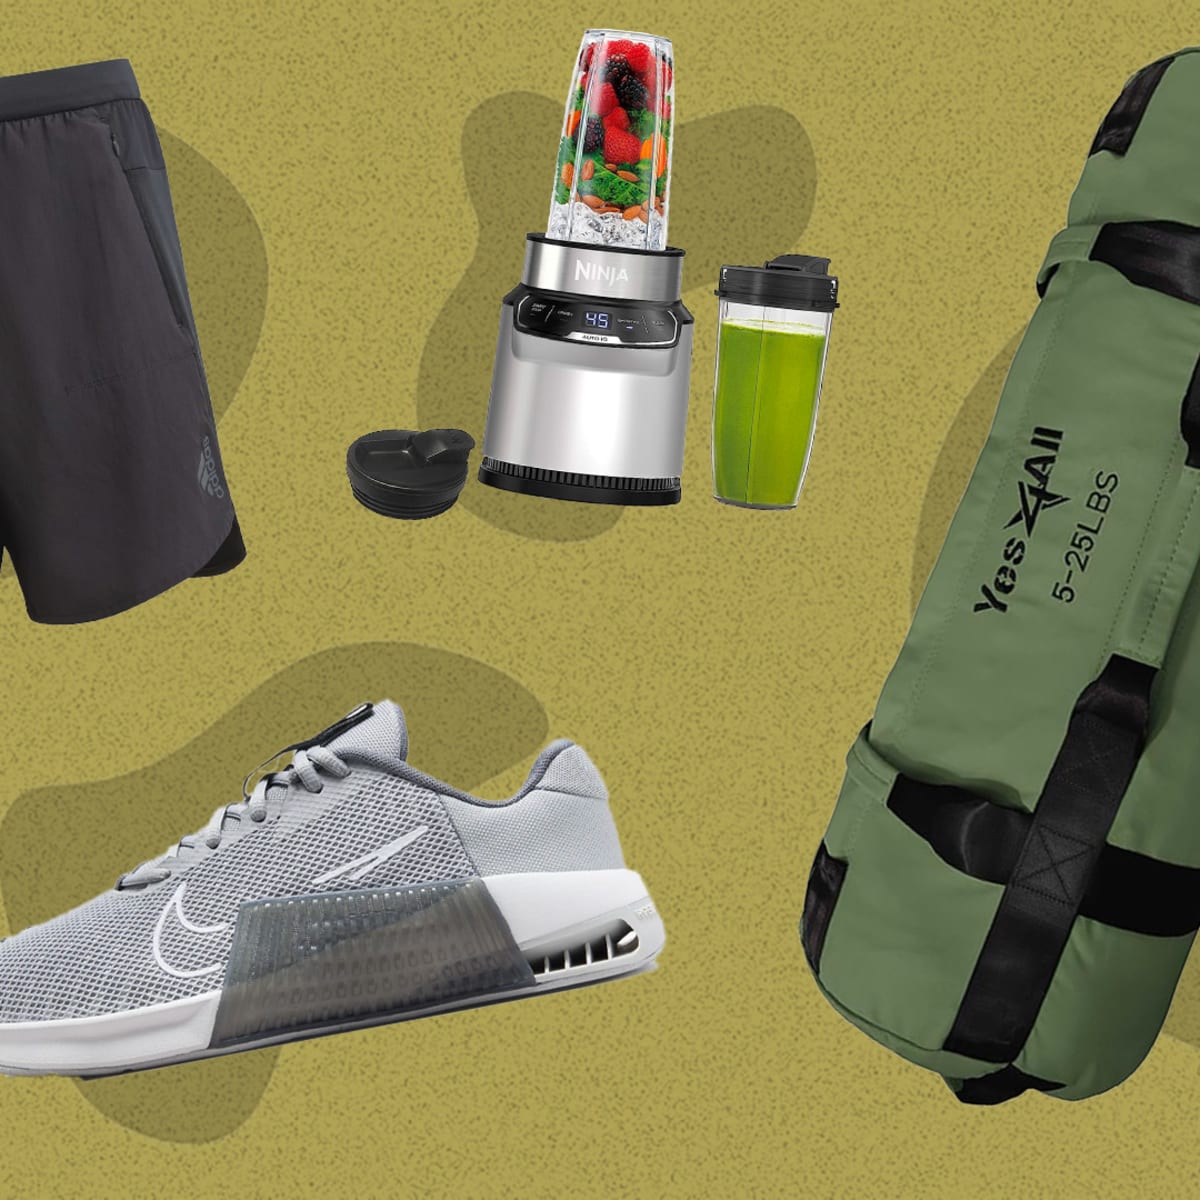 5 Must-Have Workout Accessories For Guys Dedicated to the Gym - 2023